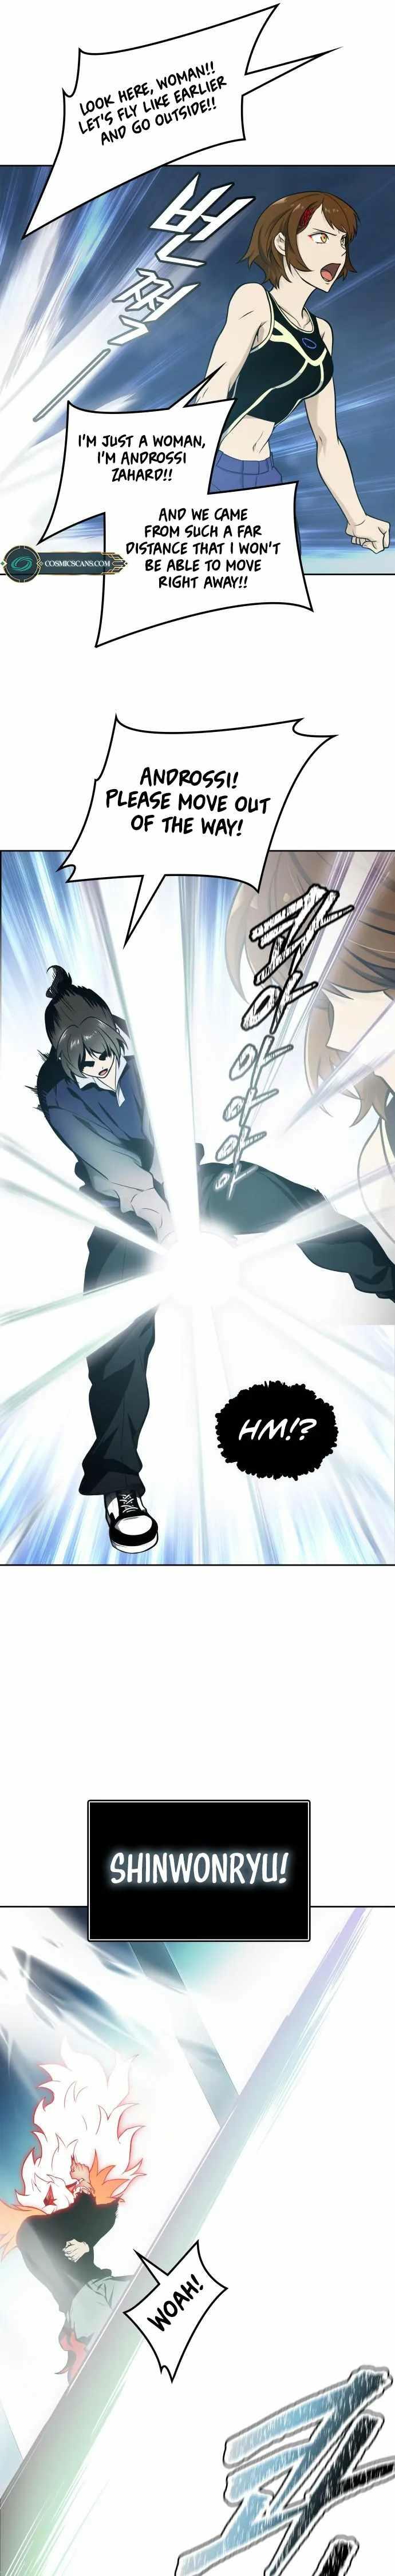 Tower Of God Chapter 588 Read Tower Of God Chapter 588 - Manganelo